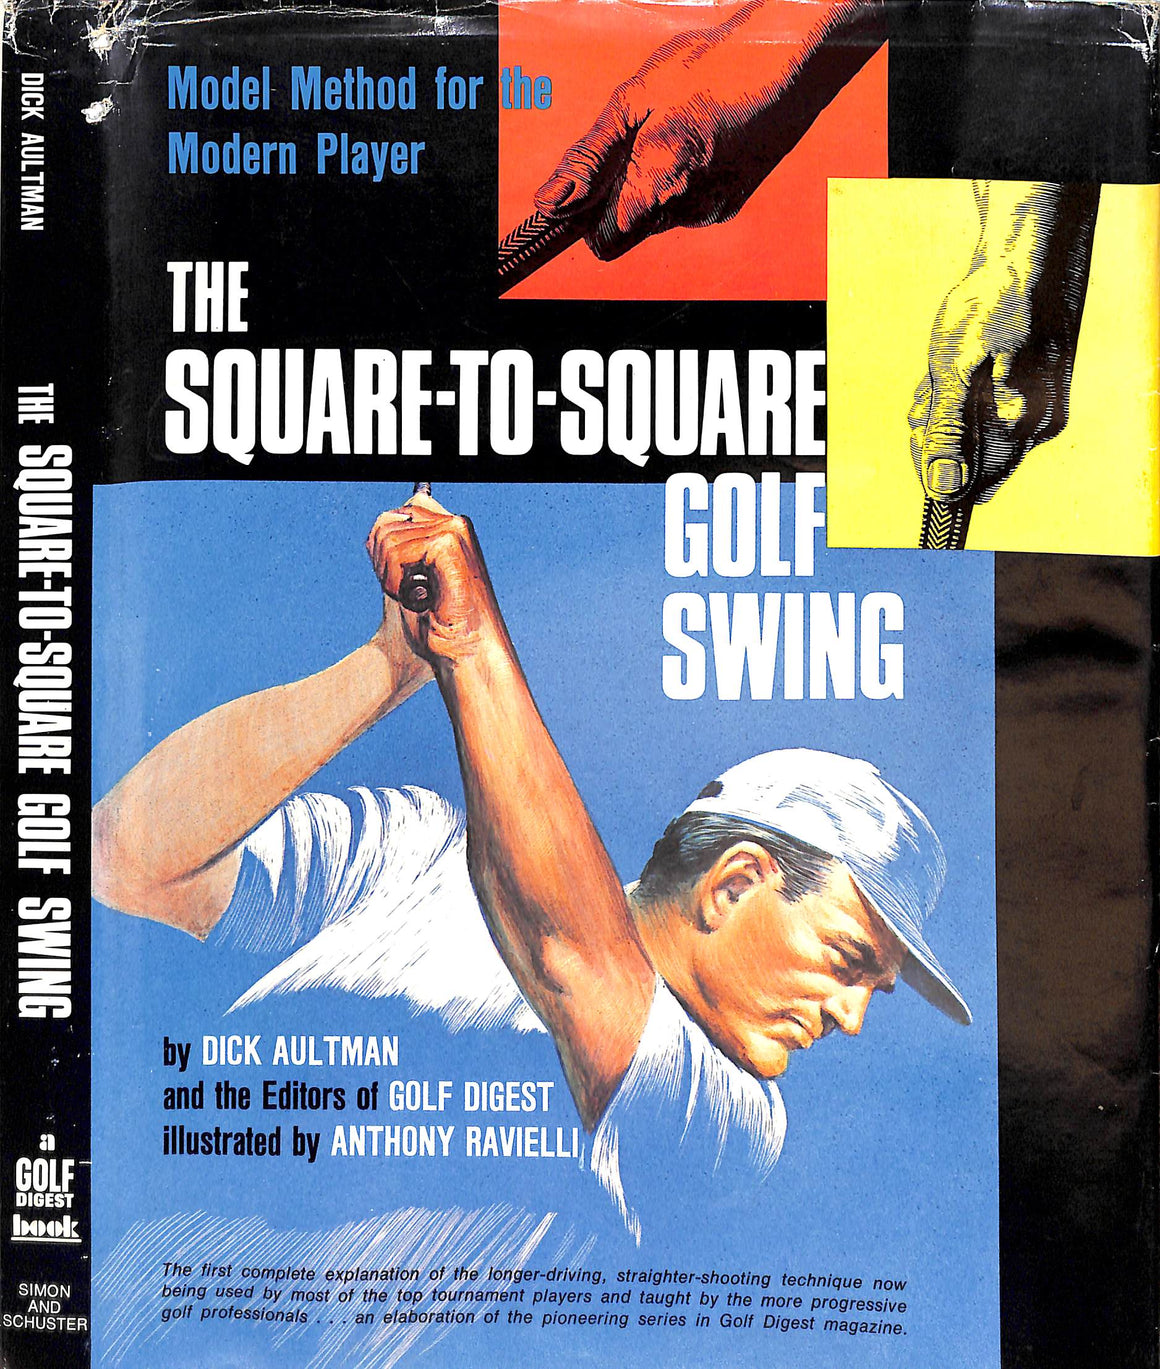 "The Square-To-Square Golf Swing" 1970 AULTMAN, Dick